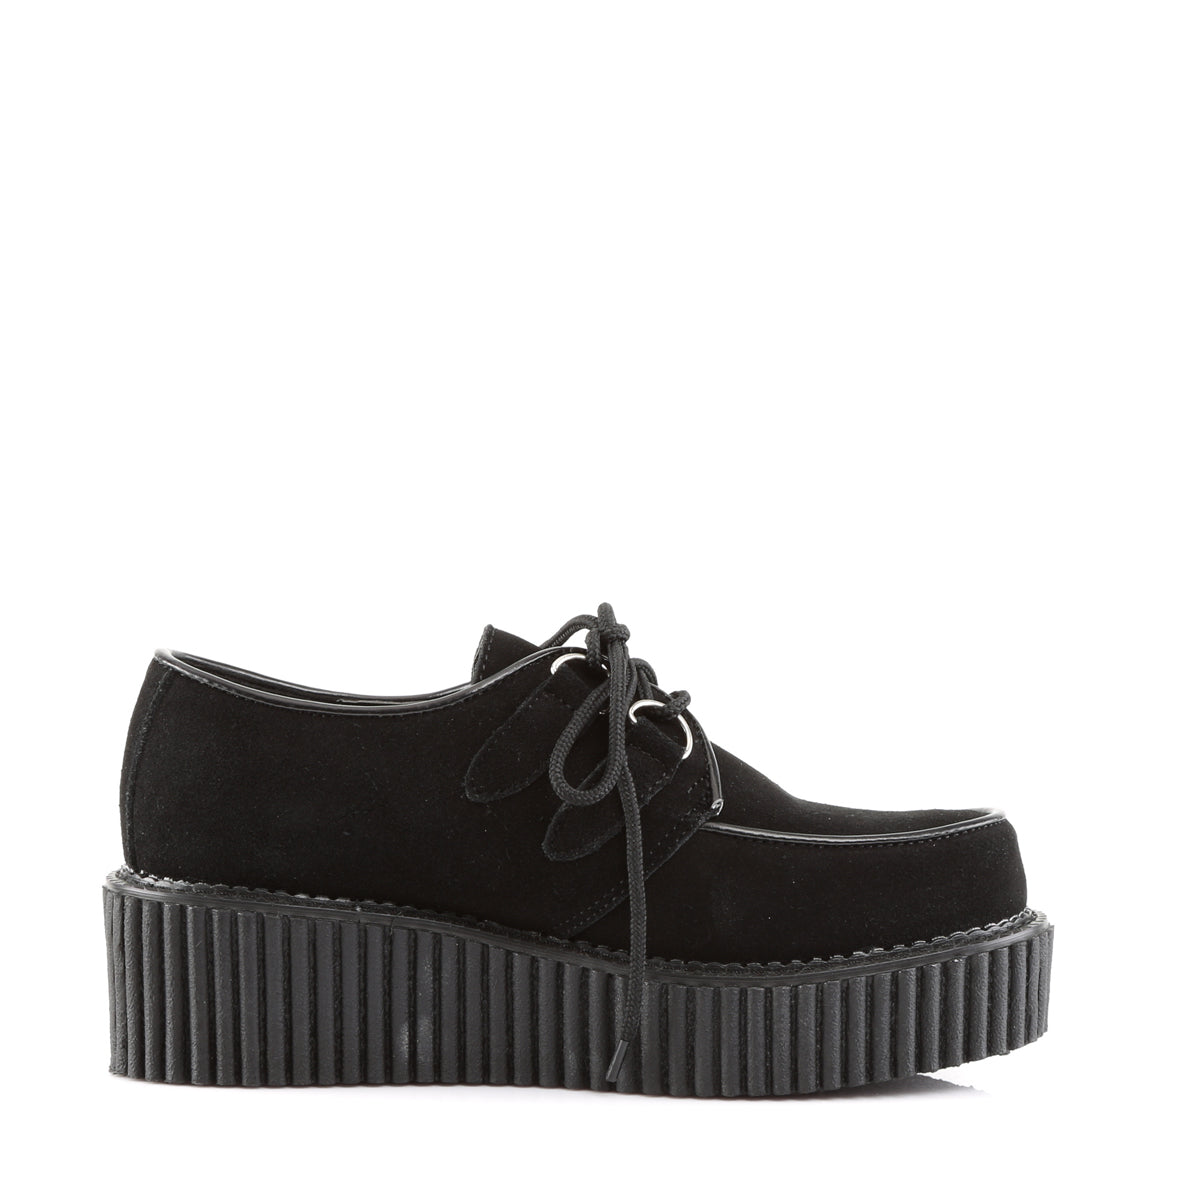 DemoniaCult Womens Low Shoe CREEPER-101 Blk Suede